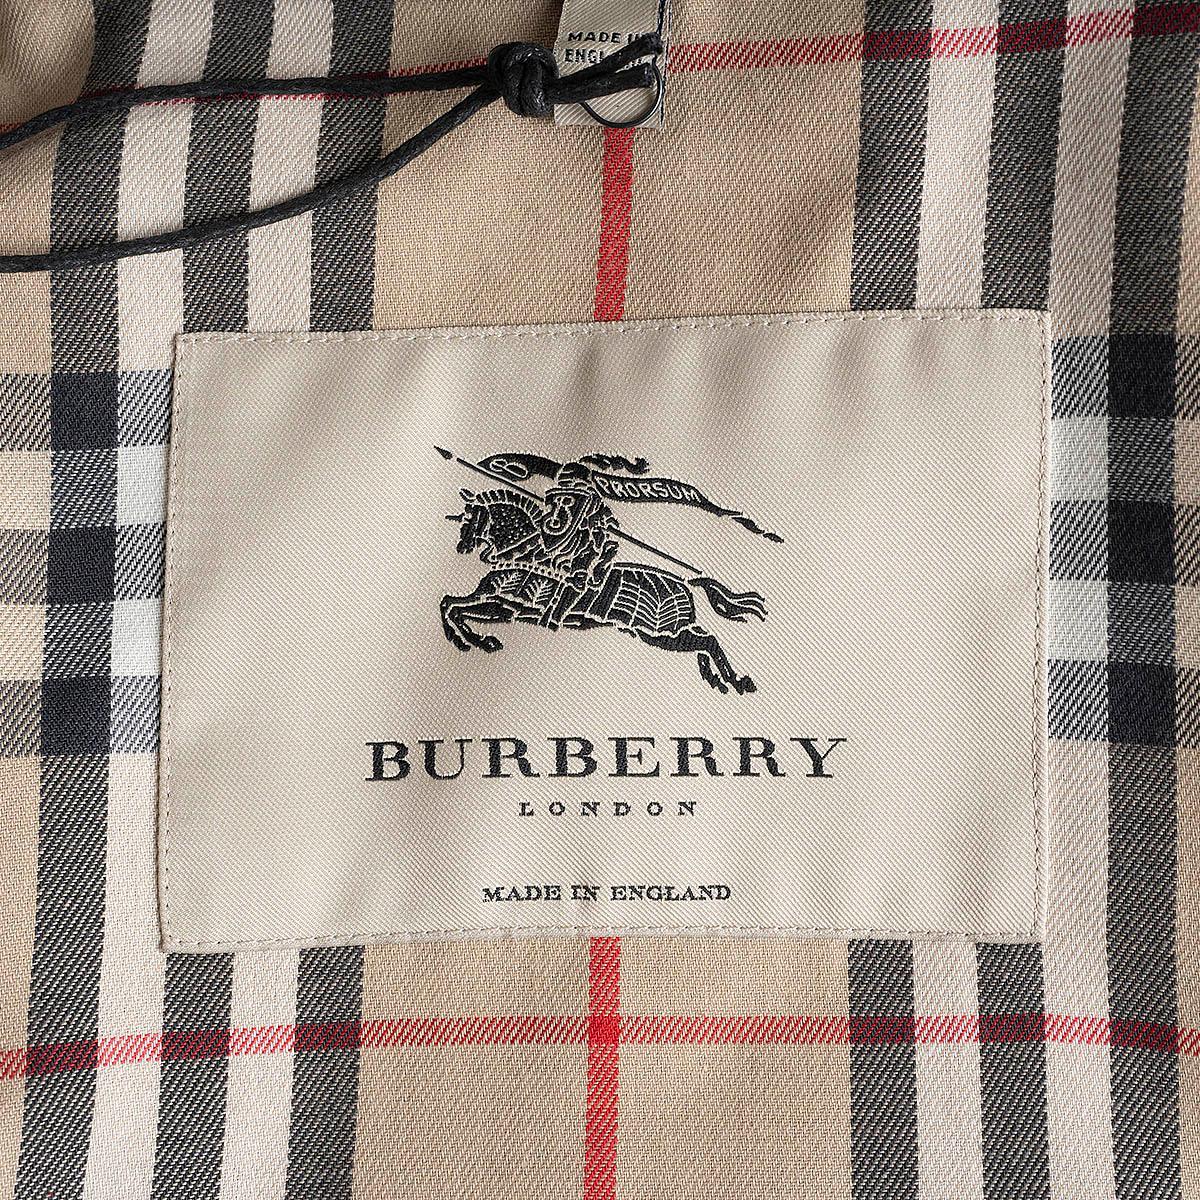 BURBERRY black cotton blend WATERLOO Trench Coat Jacket 10 M For Sale 3